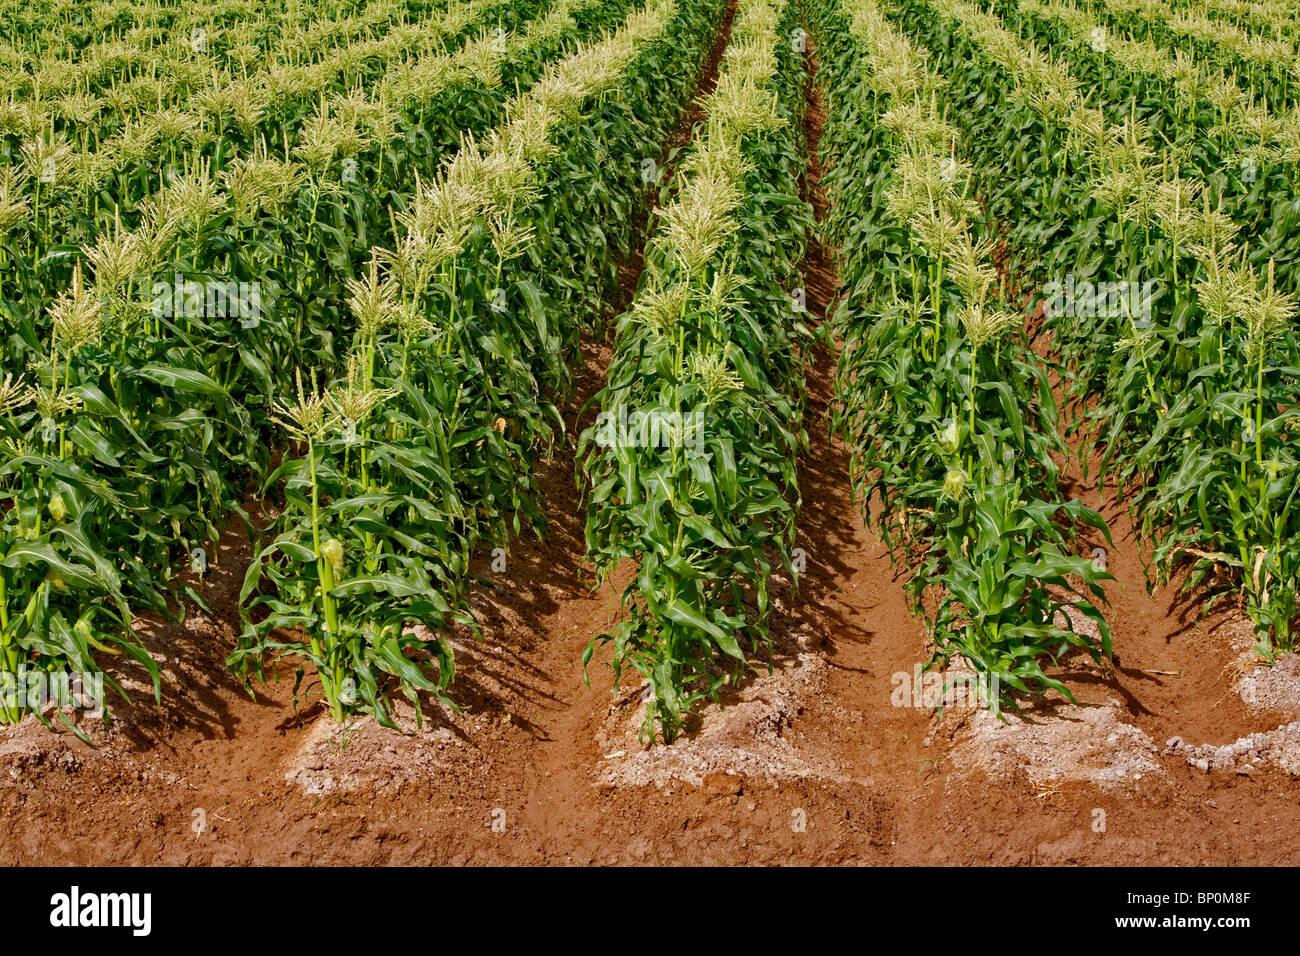 A good stand of ear corn matures in the Holtville area of the Imperial Valley, California, USA Stock Photo